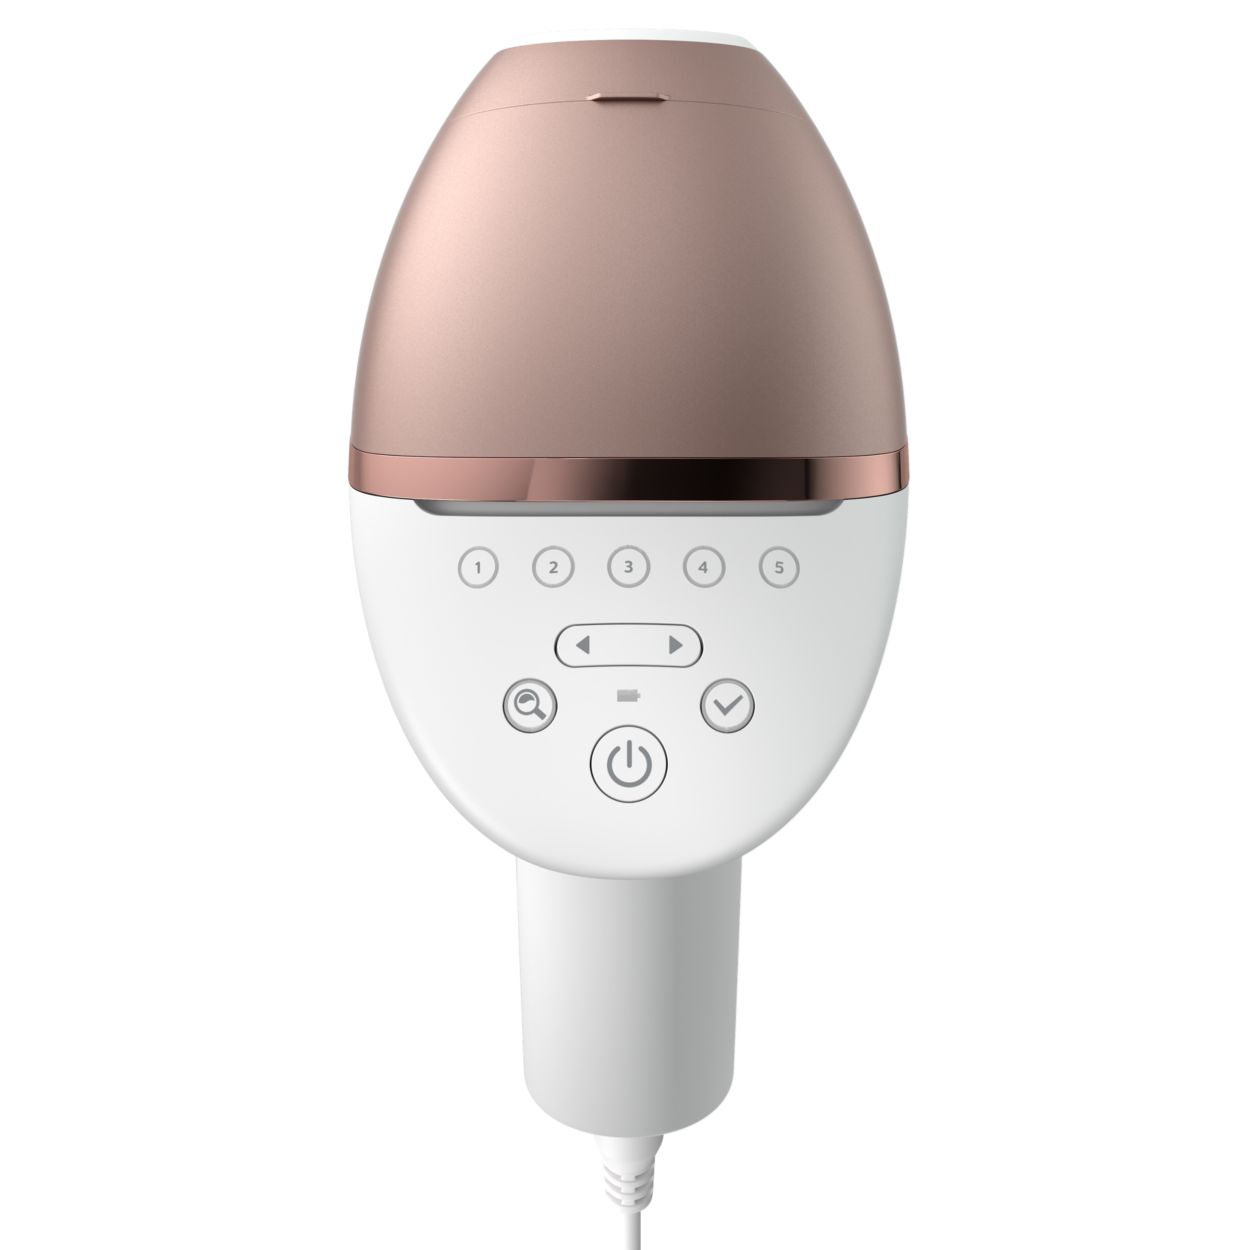 Philips Lumea 8000 Series IPL Hair Removal Device, in Lincoln,  Lincolnshire